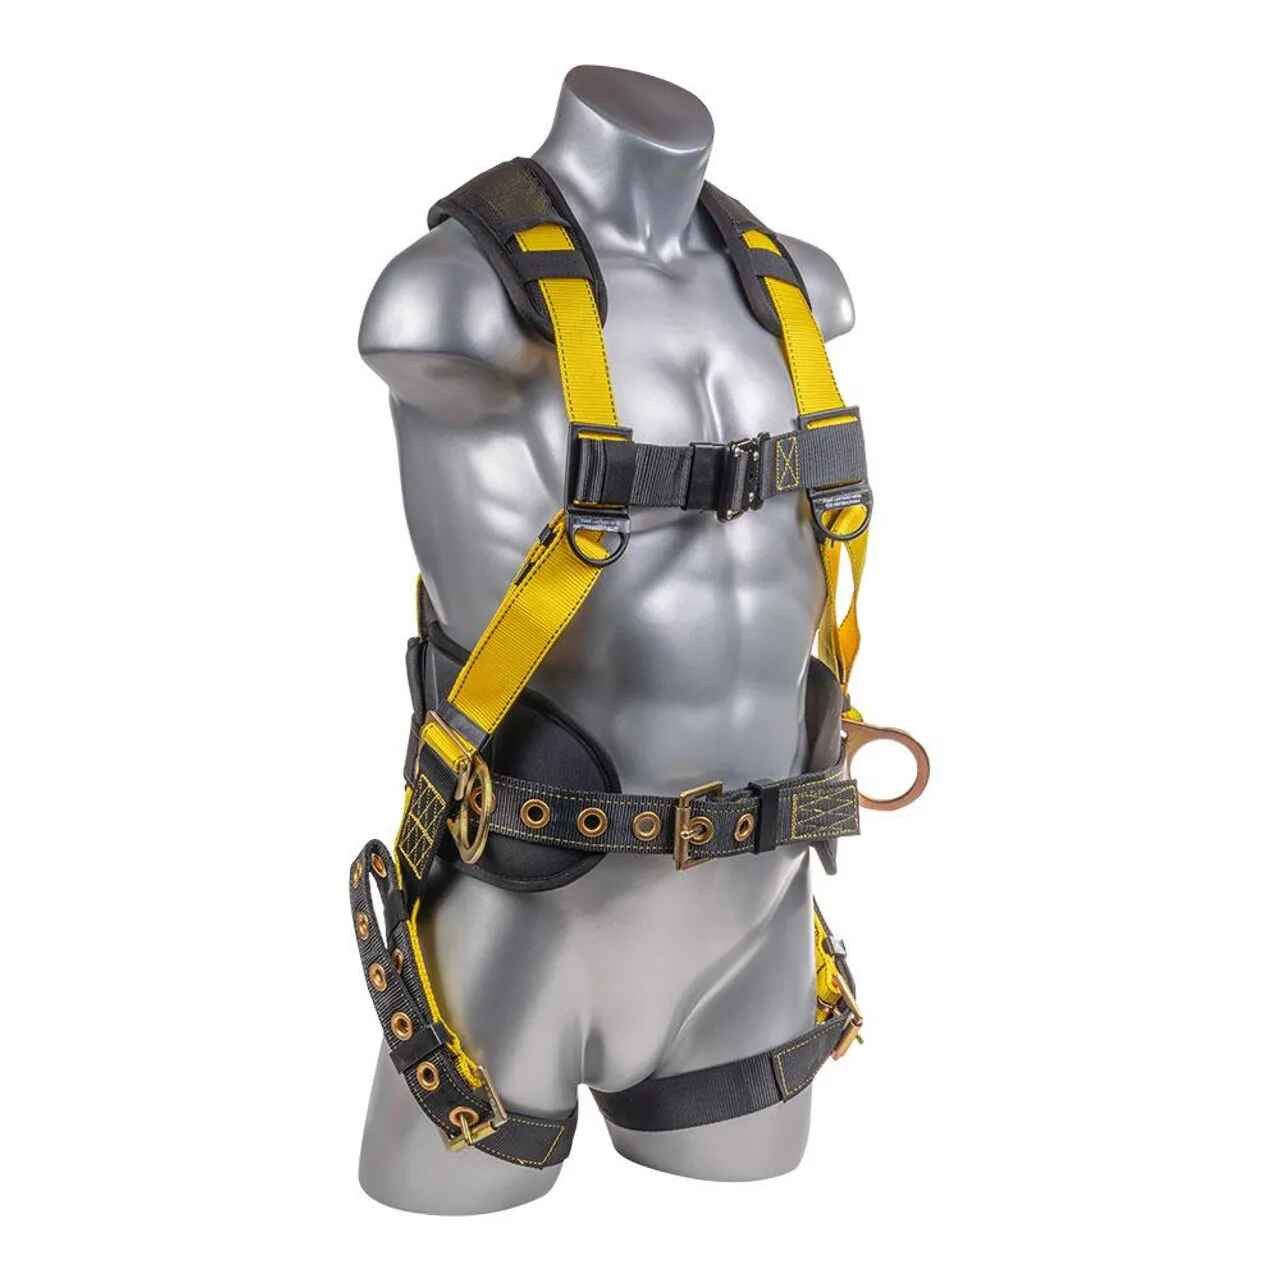 Construction Safety Harness 5 Pt Back Padded, QCB, Grommet Legs Yellow - Defender Safety